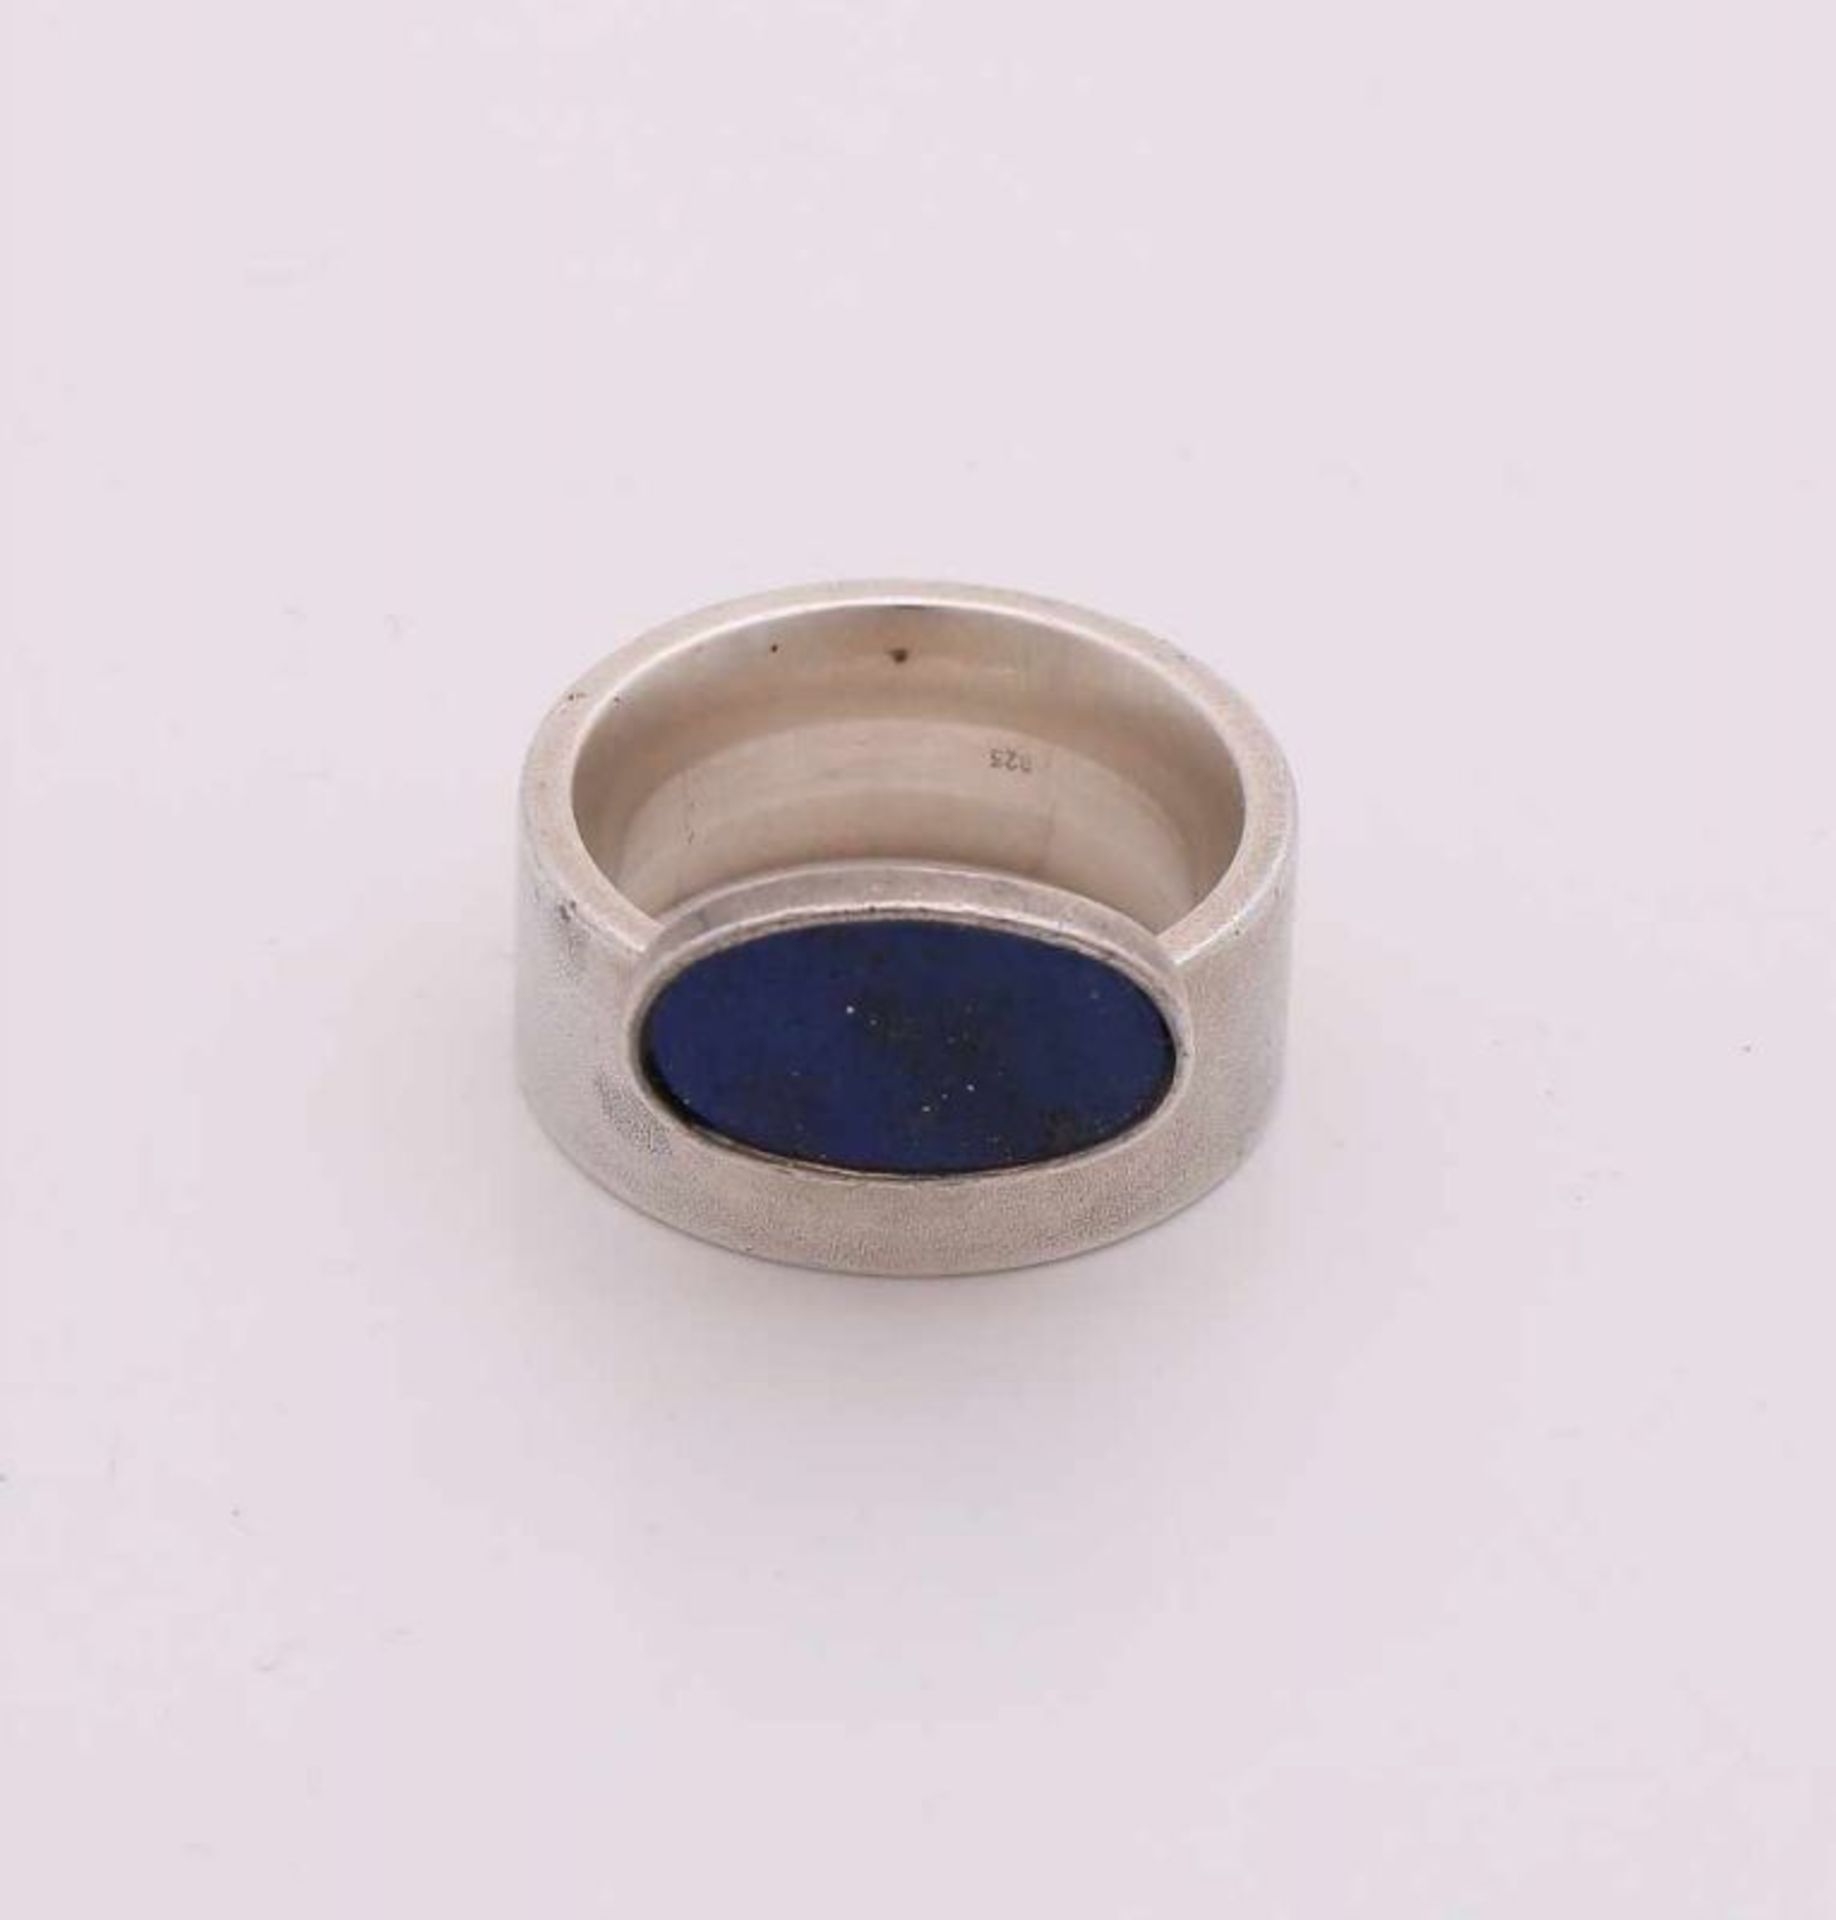 Wide silver ring, 925/000, with a sleek matted band with an oval cabouchon cut lapis lazuli.